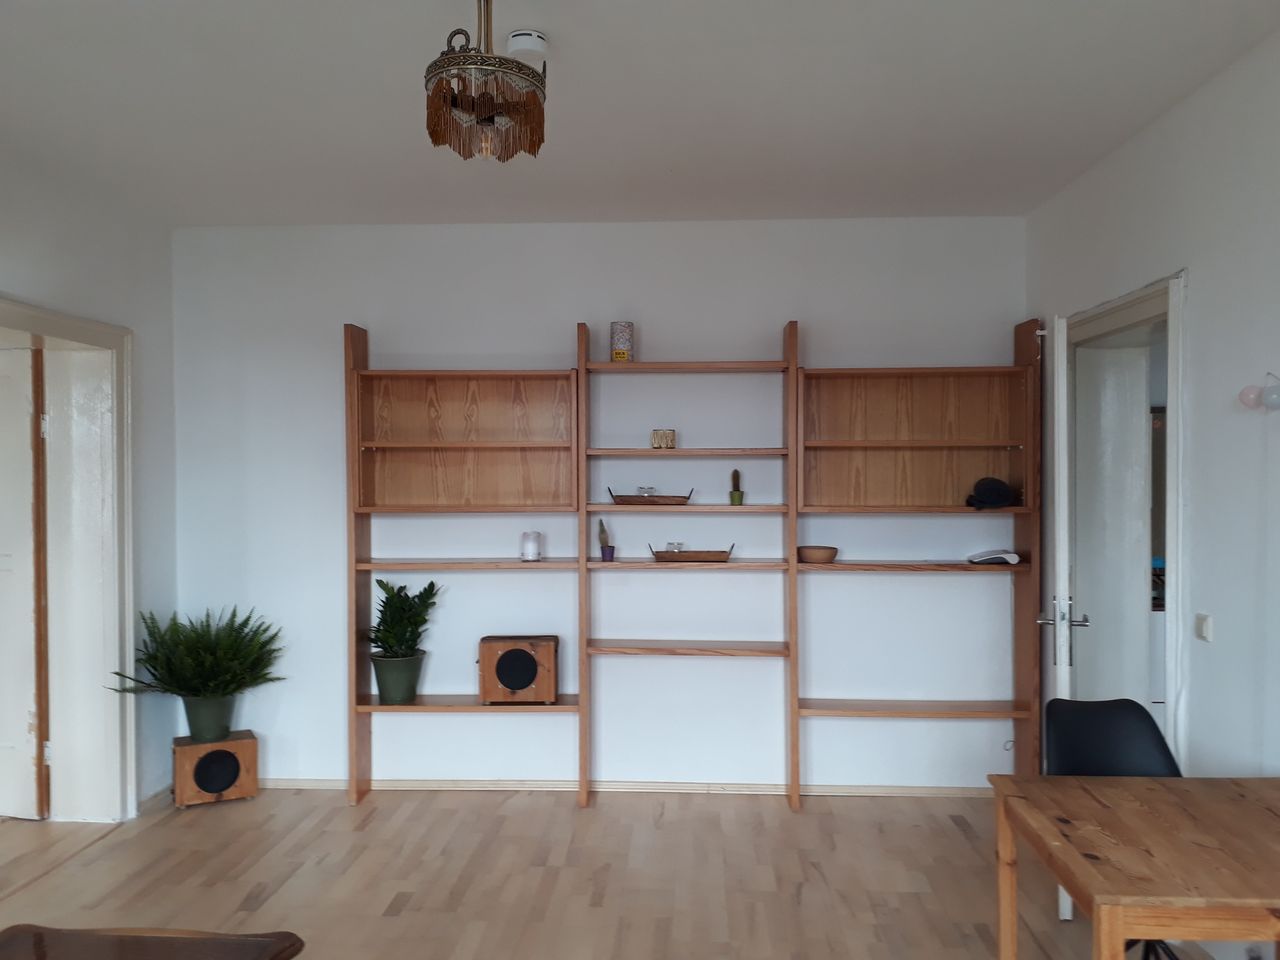 Bright studio apartment in Friedrichshain, central located with great connections